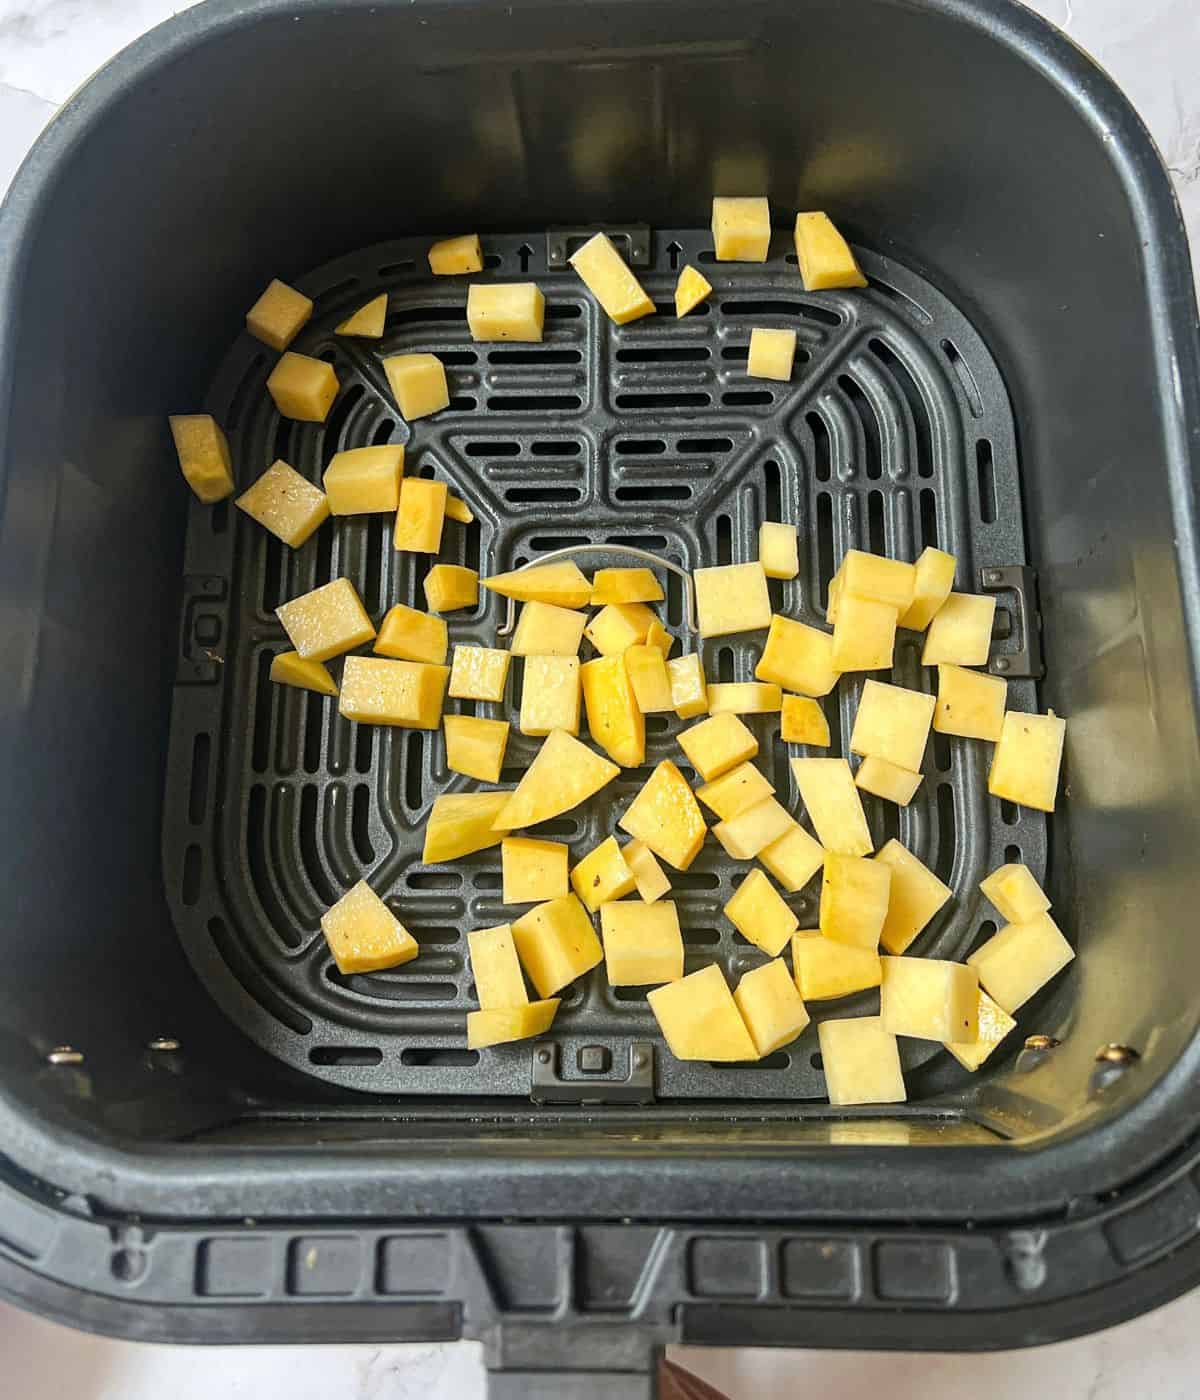 Cubes of raw swede in an air fryer basket.